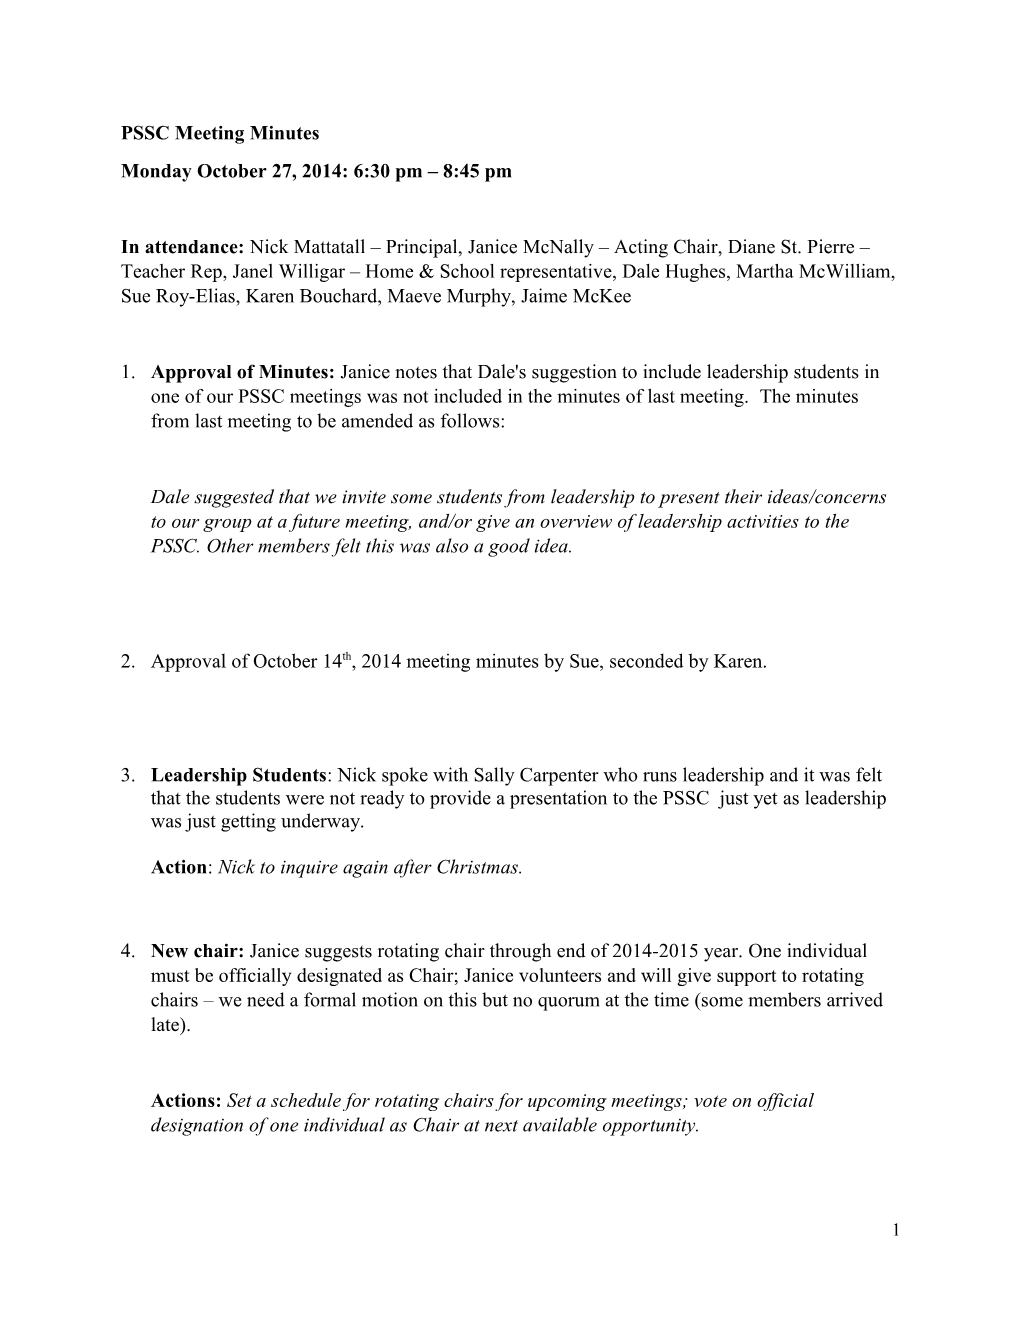 PSSC Meeting Minutes Oct. 27, 2014